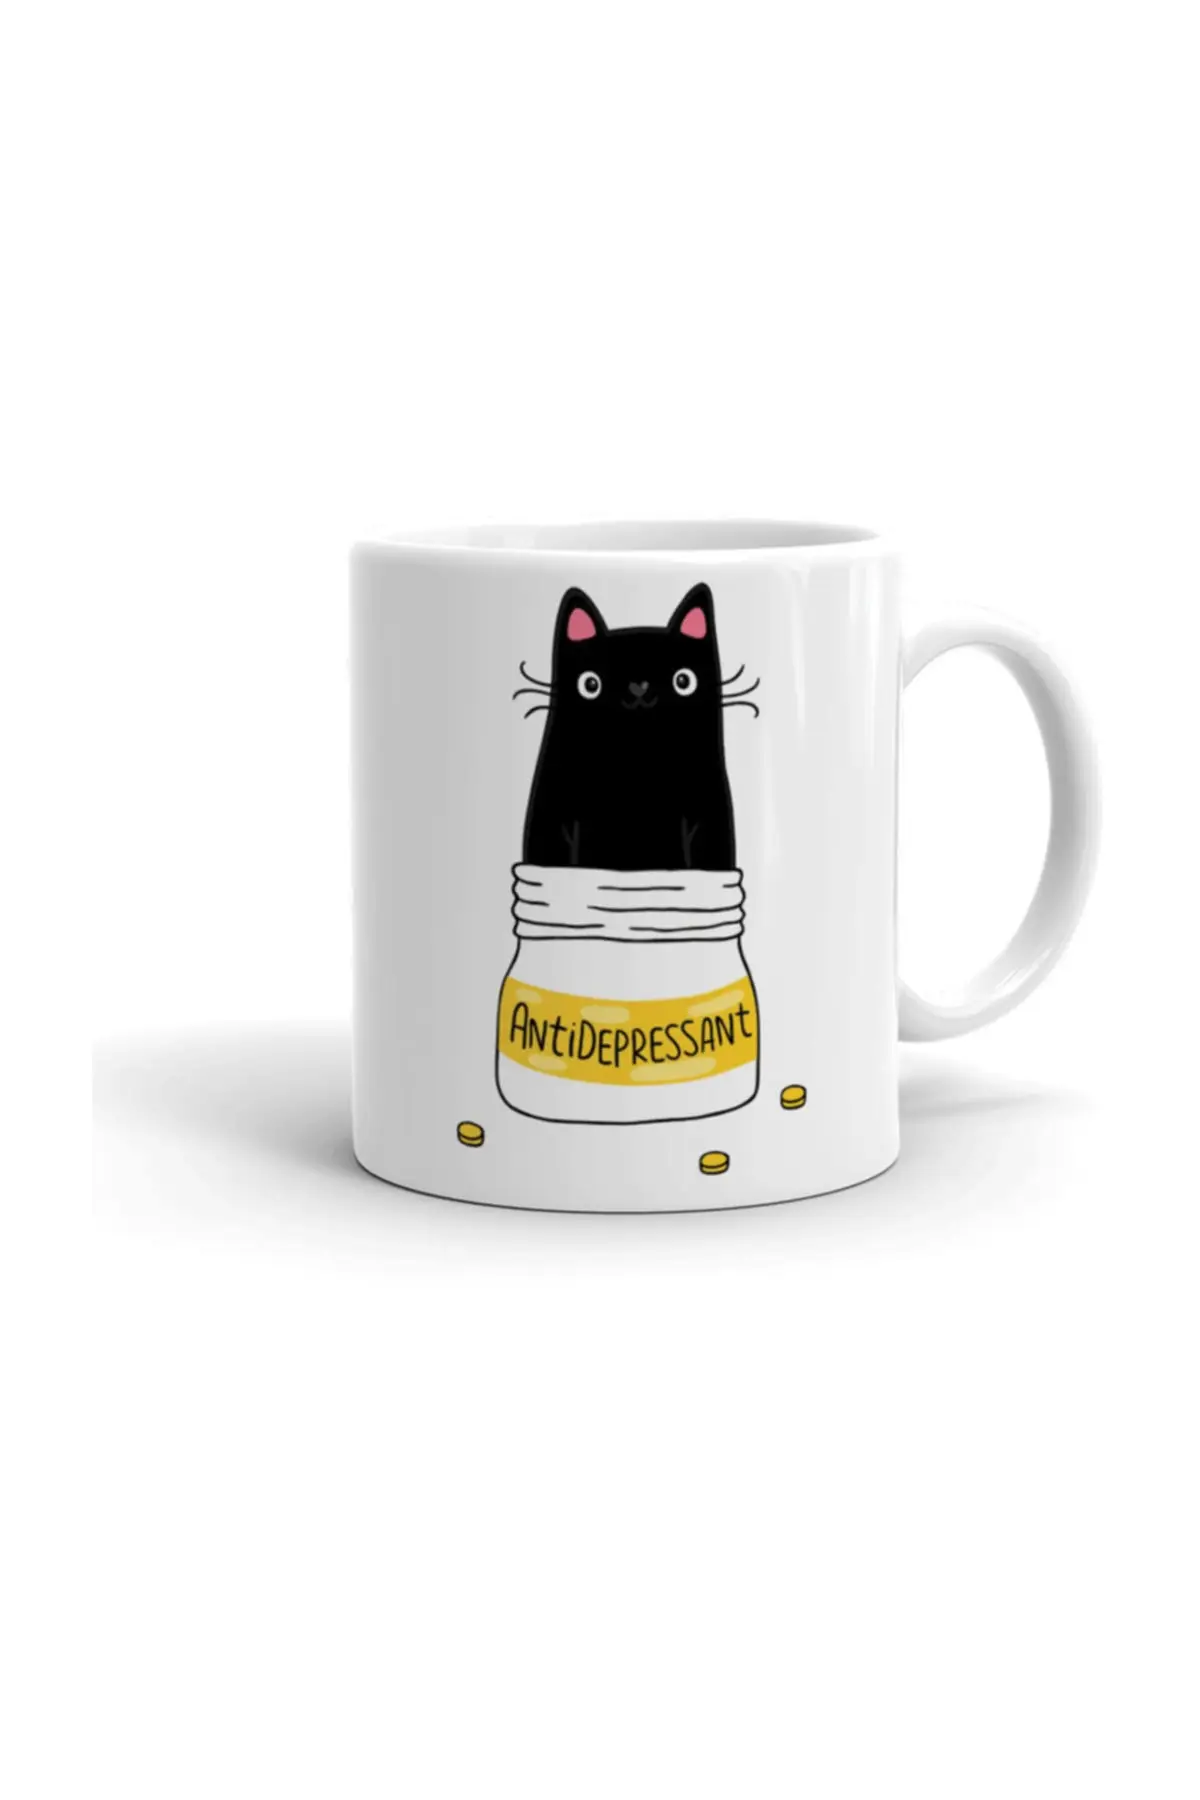 

Antidepressant Cat Ceramic Mug Cup Porcelain Coffee Mugs Tea Cups Hot Drinks Gift Products